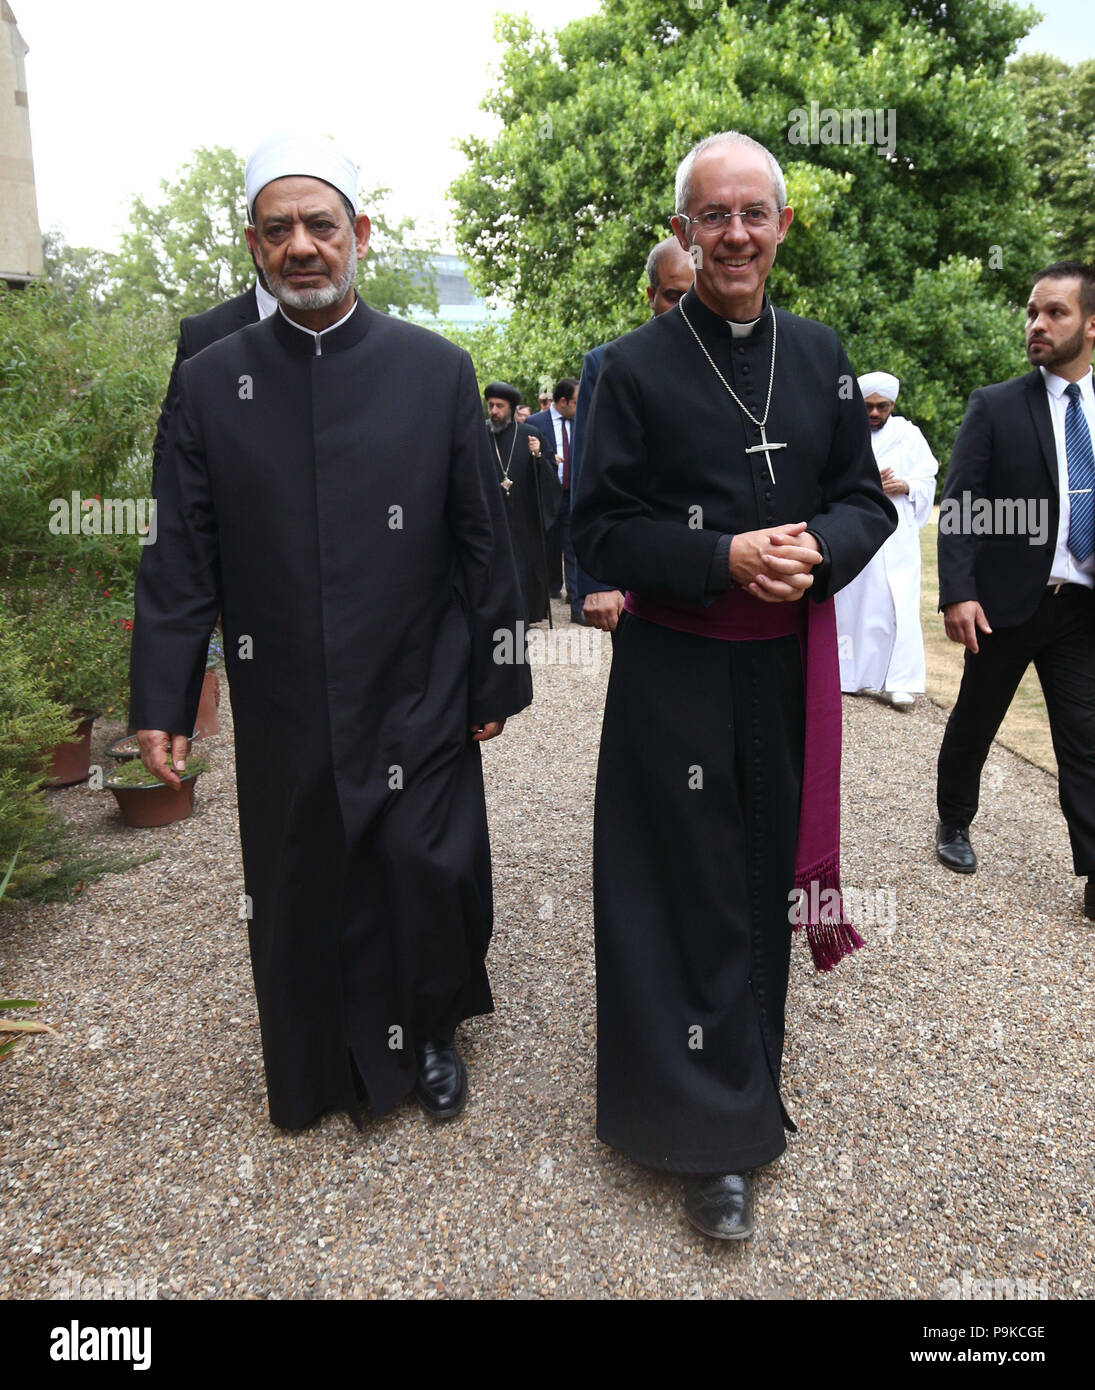 The Archbishop of Canterbury Justin Welby (right) with The Grand Imam of al-Azhar al-Sharif, Dr Mohamed Sayed Tantawy at Lambeth Palace, London, during a visit to celebrate the Emerging Peacemakers Forum - which has come to fruition due to the Anglican Communion and from Al-Azhar Al-Sherif dialogue committee. Stock Photo